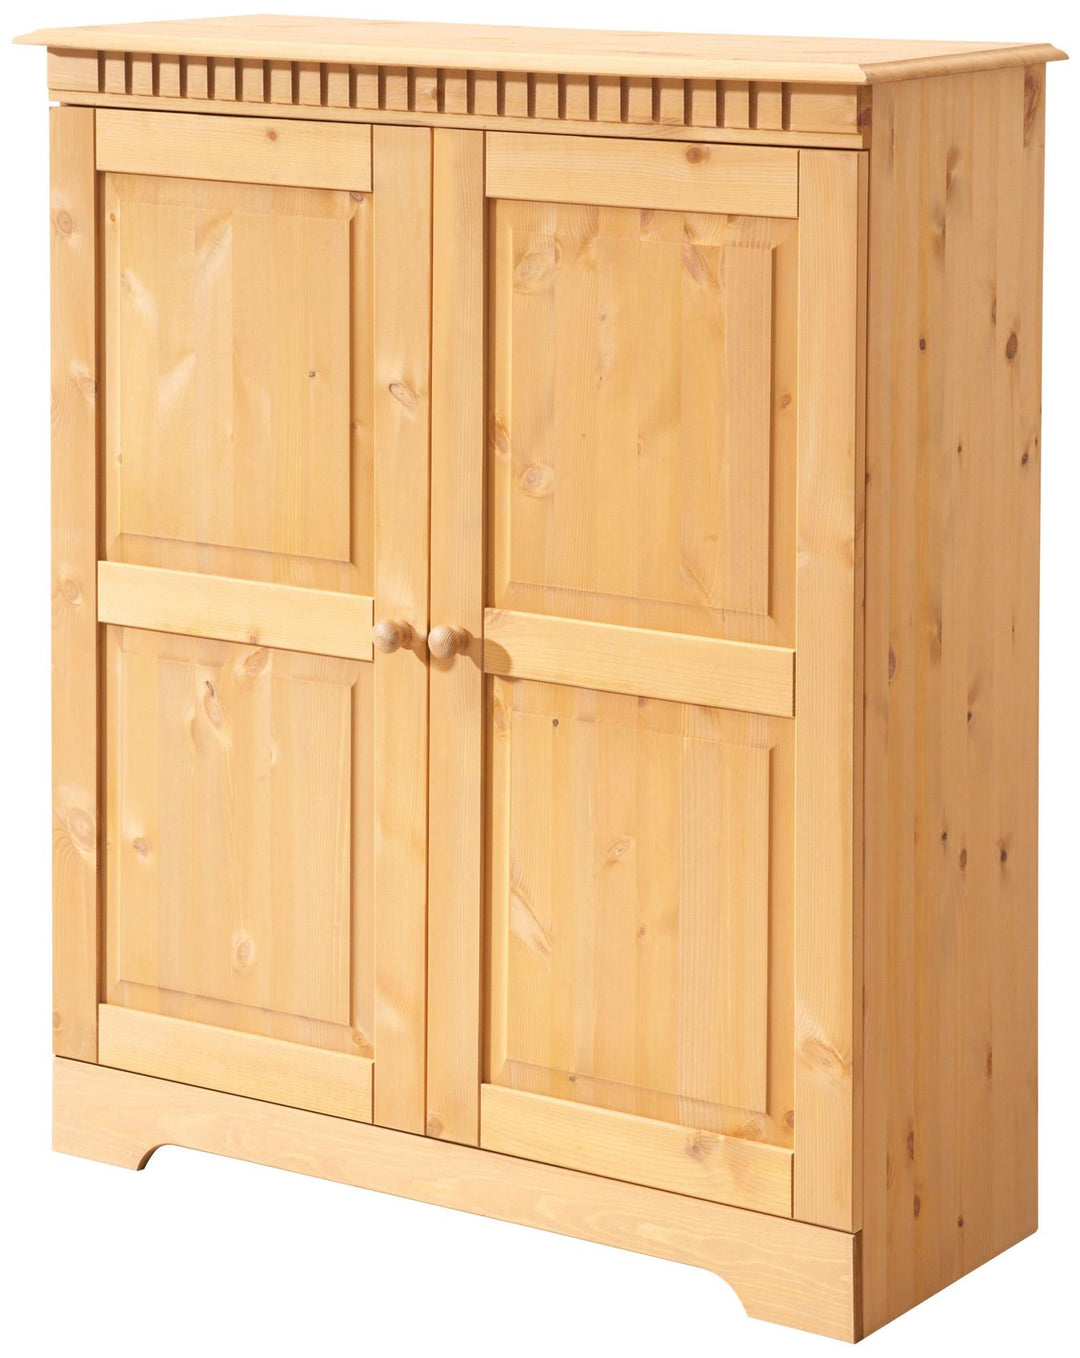 Solid wood closed cabinet for storage - Brown